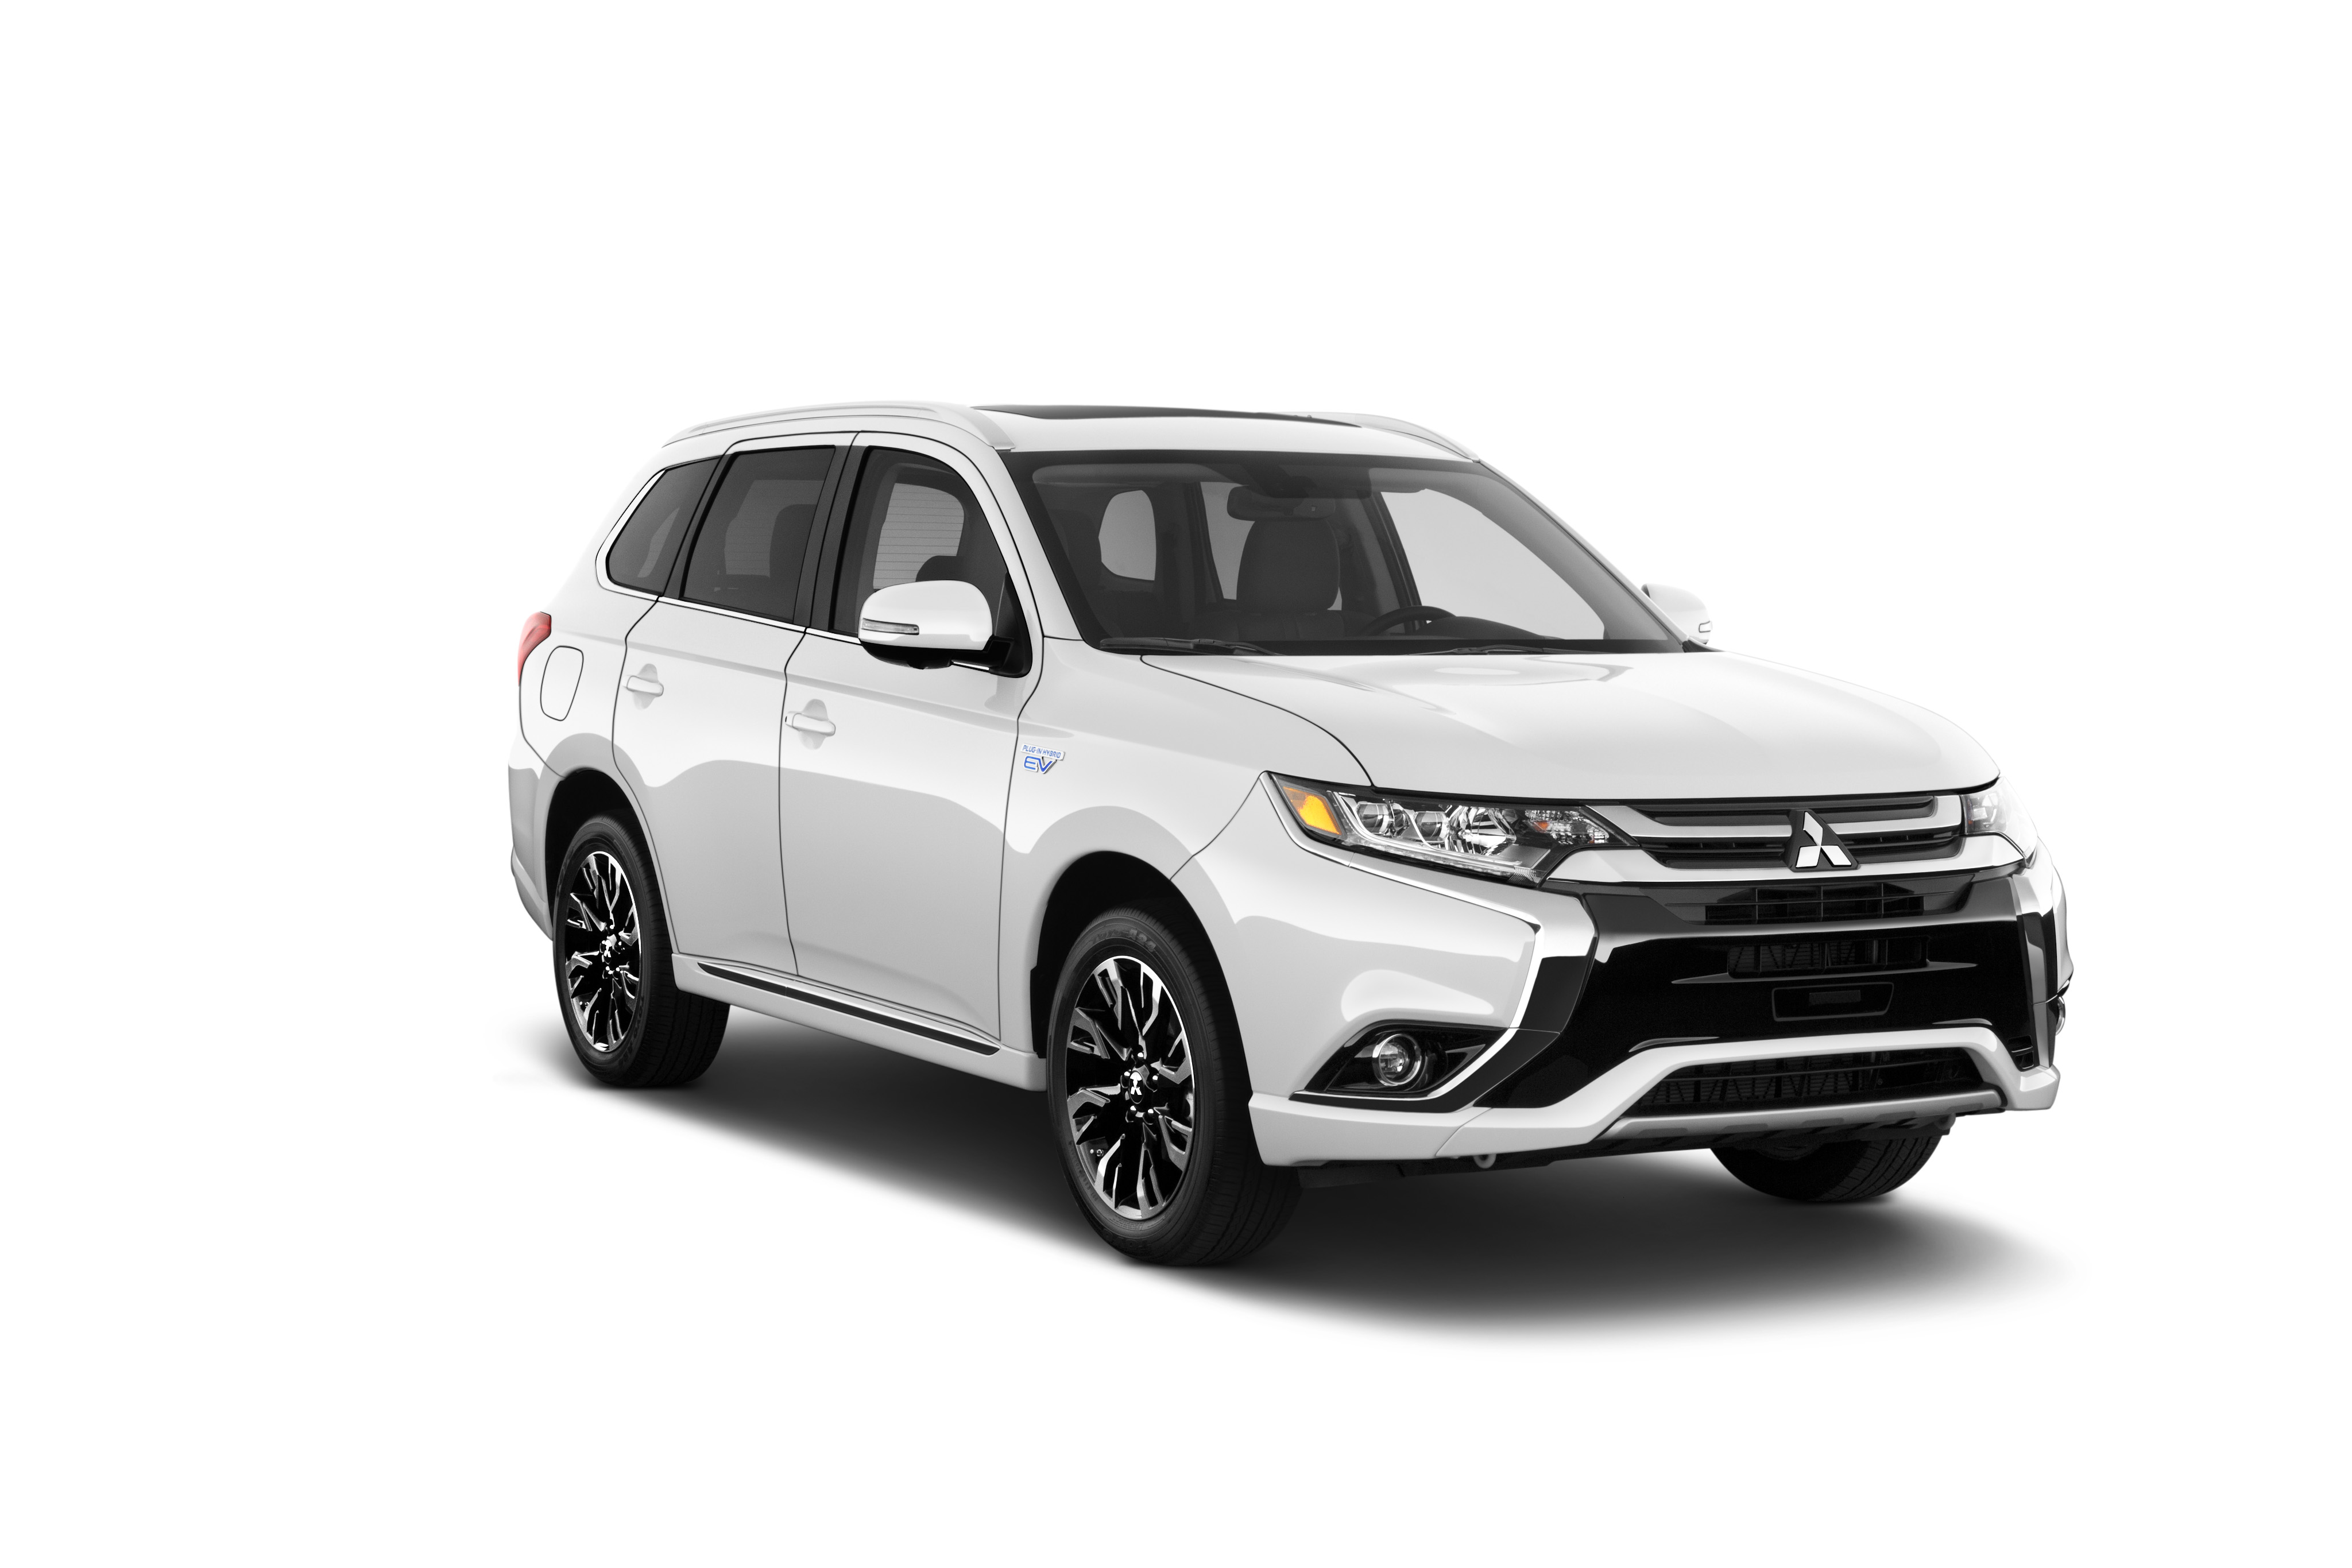 Mitsubishi Outlander modern specifications